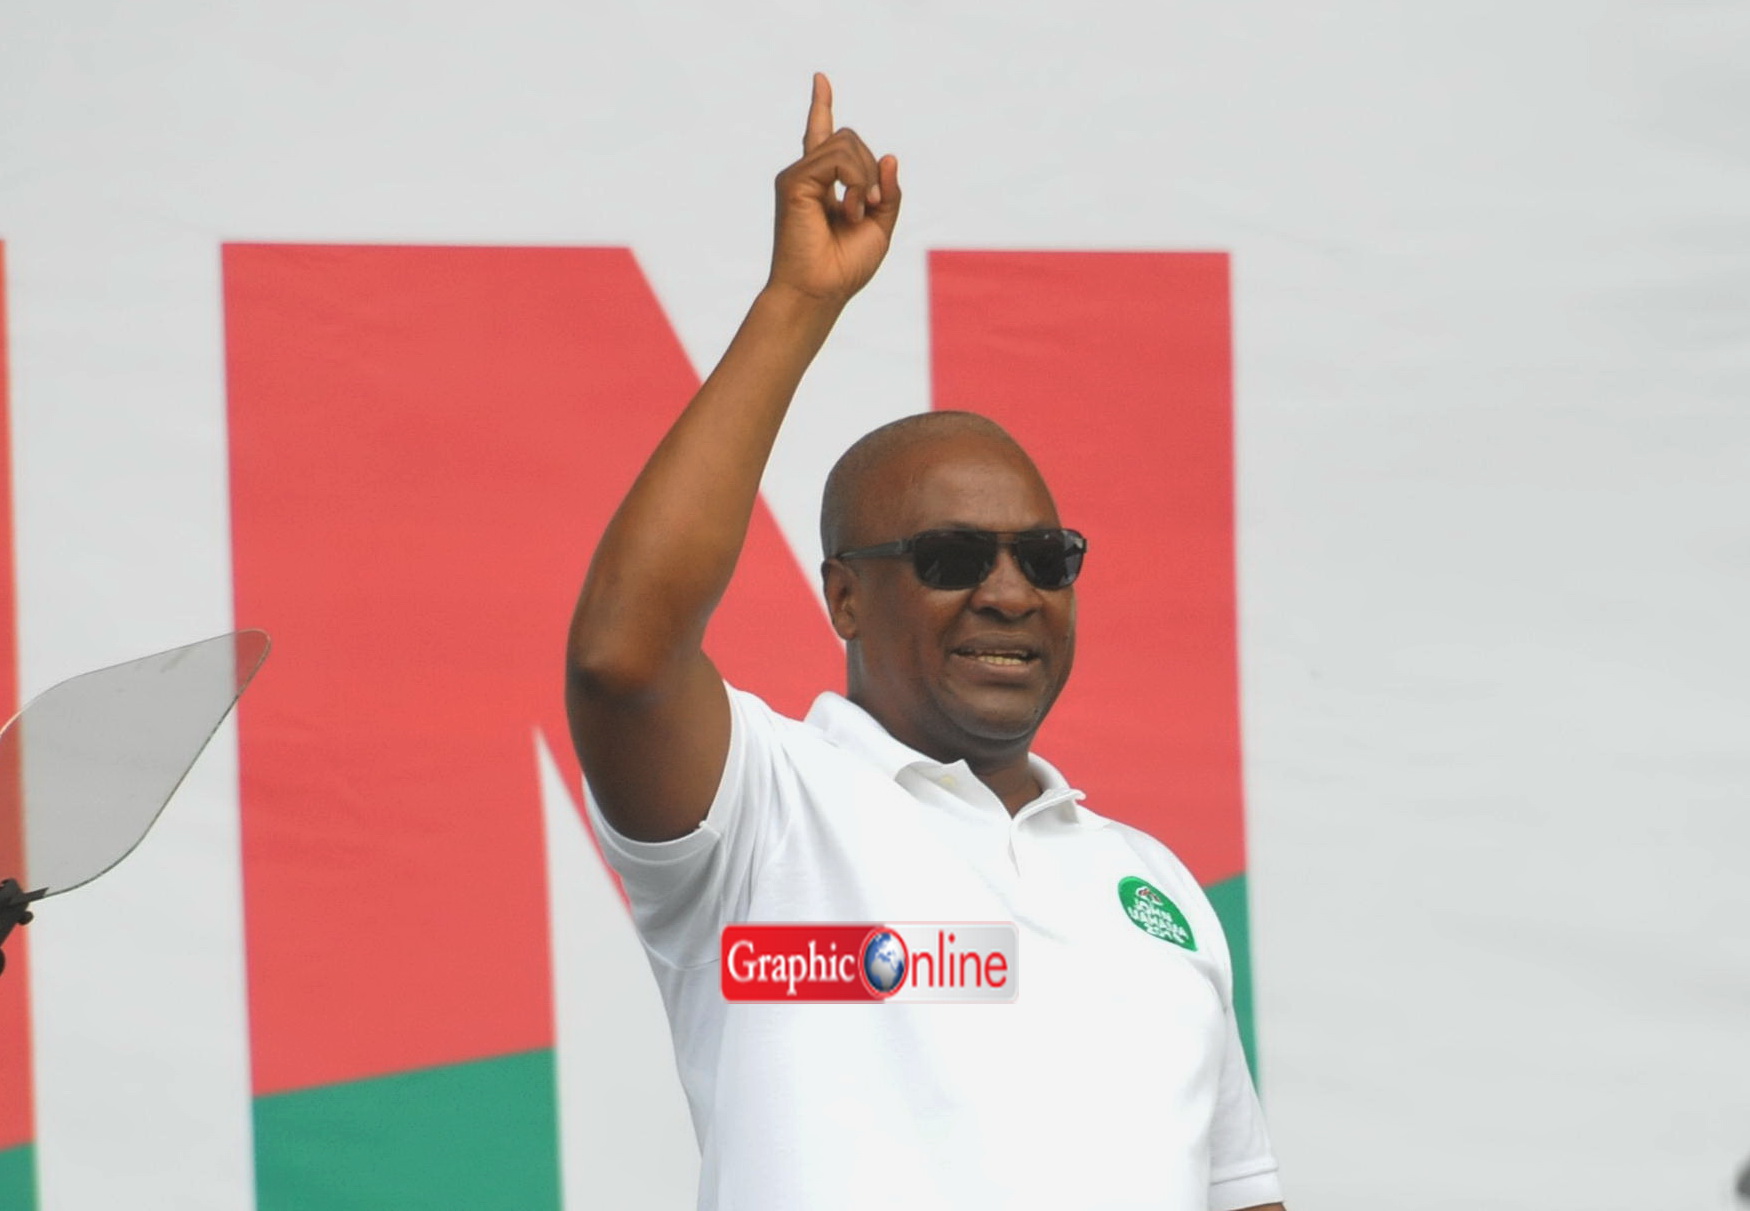 NDC launches 2016 election campaign to retain power